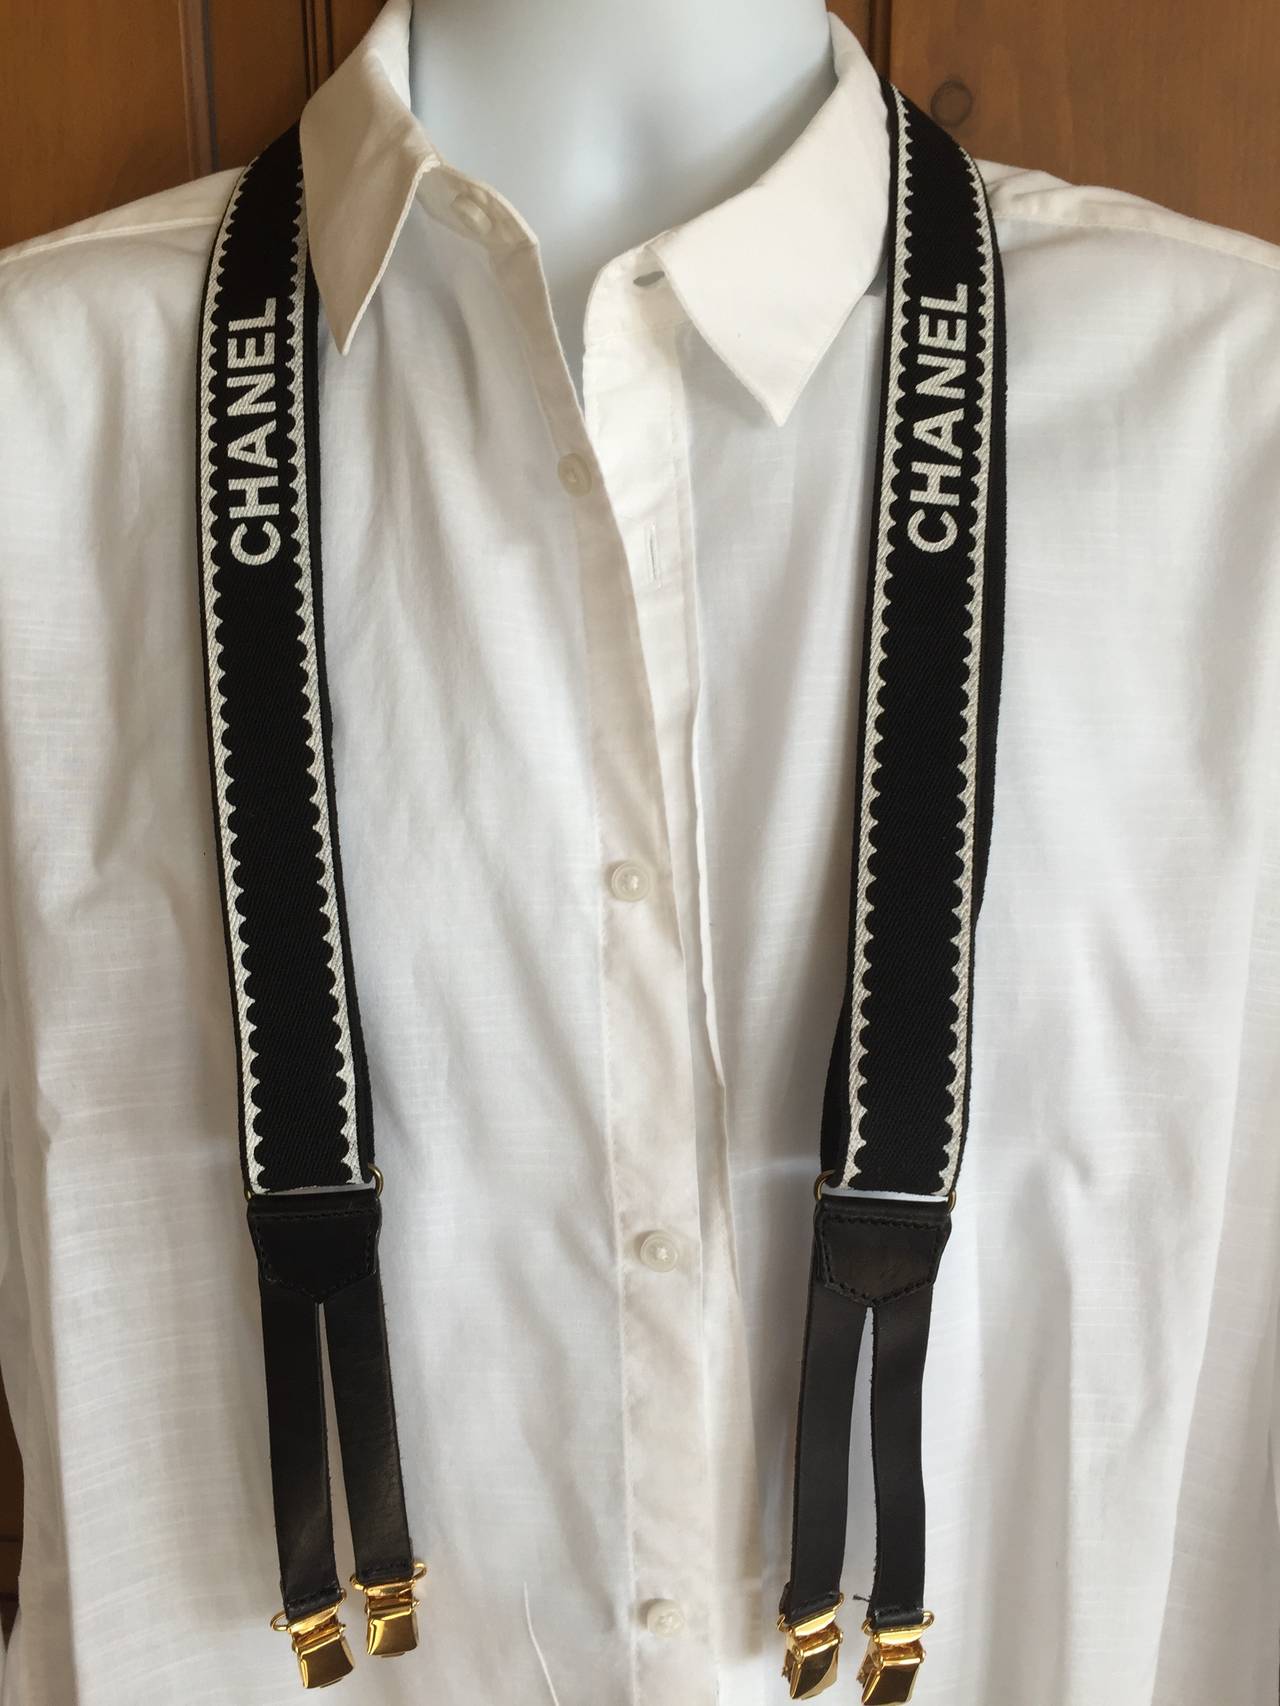 Wonderful vintage black and white suspenders from Chanel.
These are pristine, unworn, the elastic straps appear to have never been extended or used.
I did not extend them for the photo.
Marks on the leather on back are from storing against the